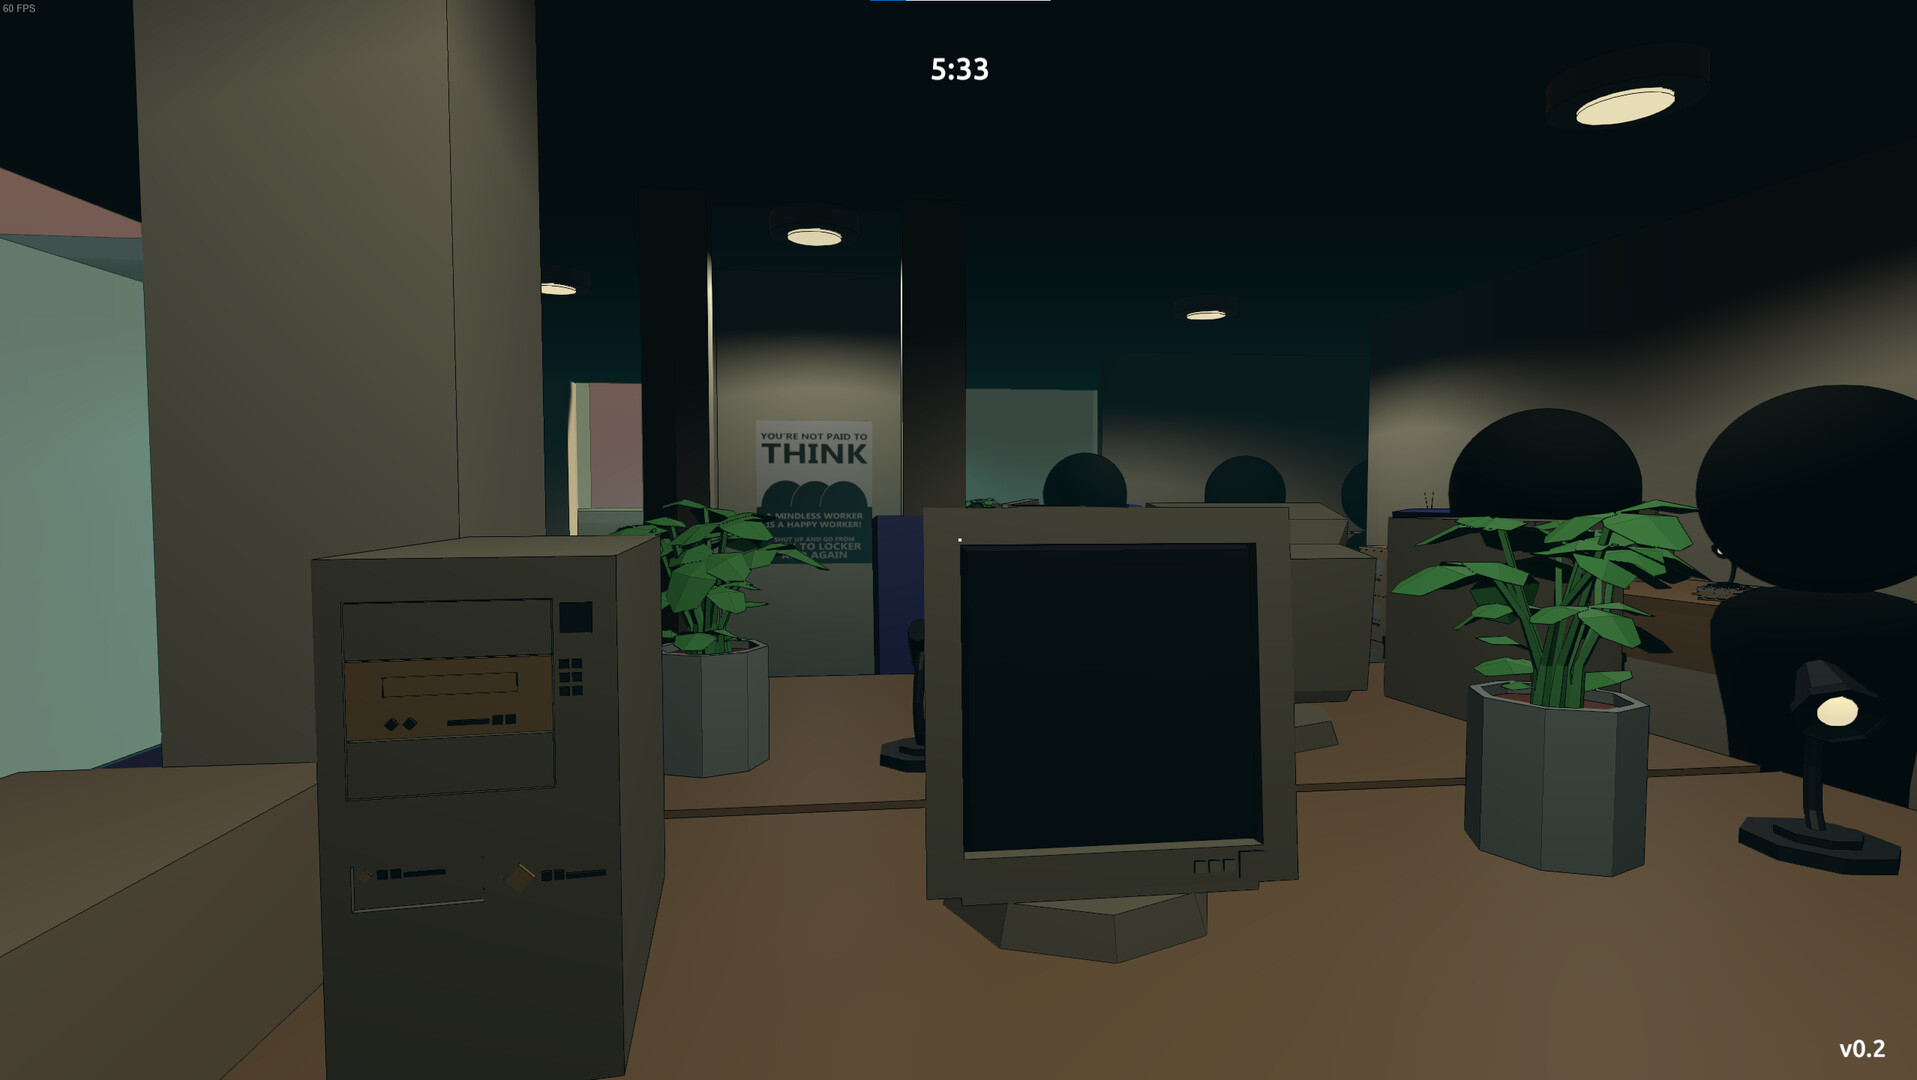 Thought I would model my home office using Bloxburg in Roblox. - iFunny  Brazil